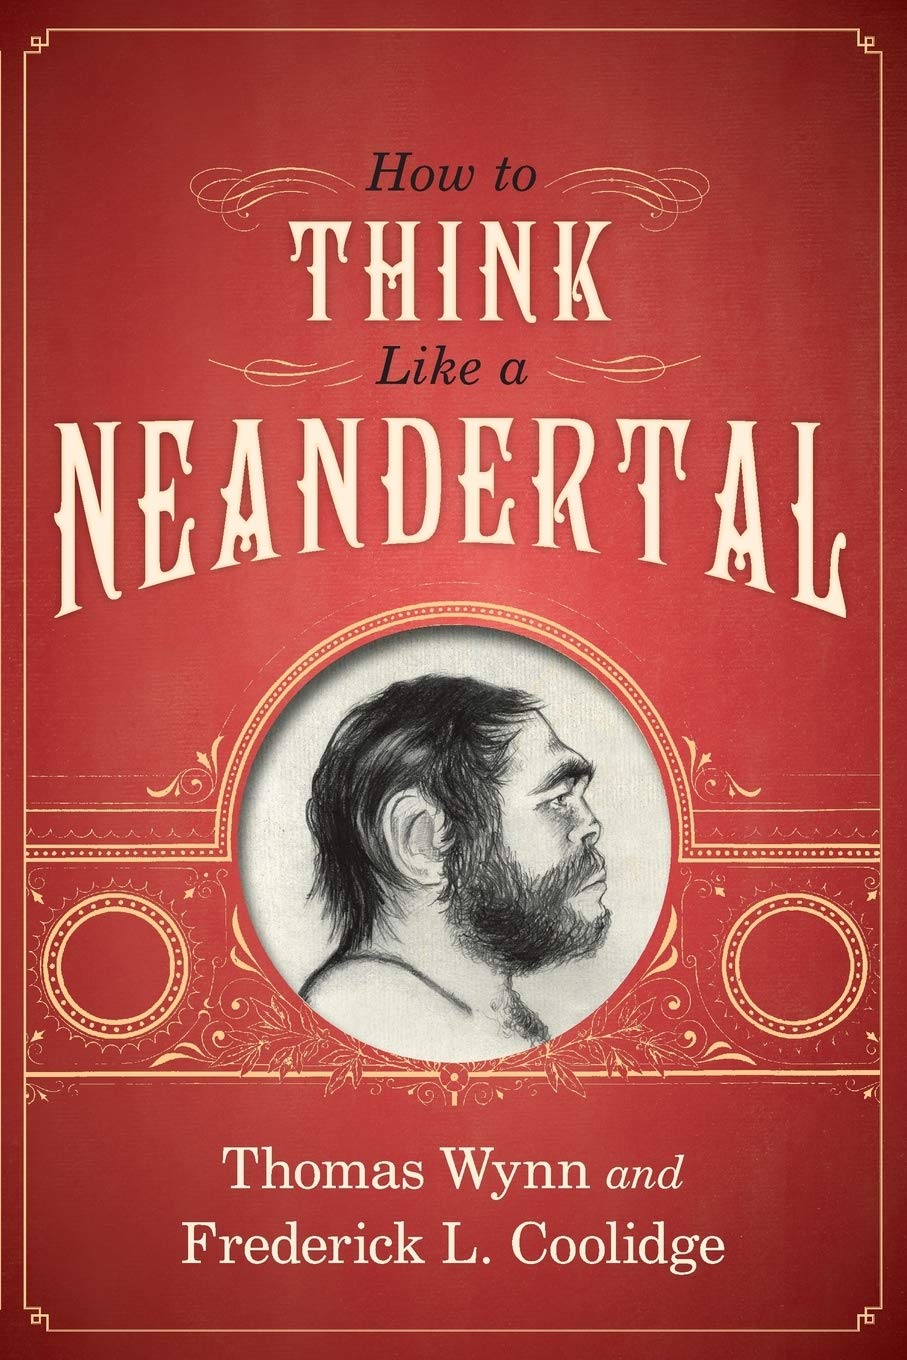 GN285 How To Think Like a Neandertal